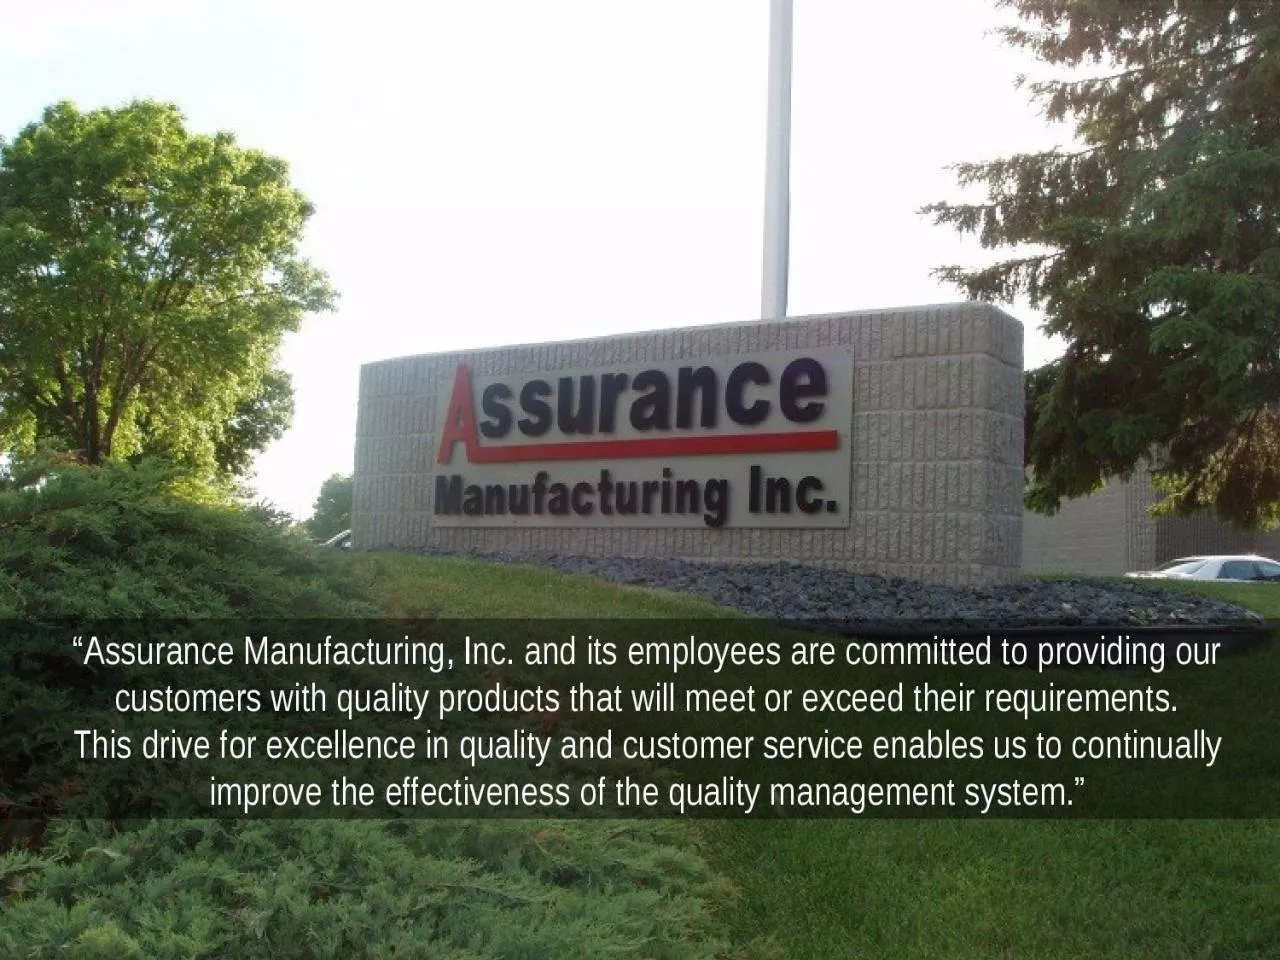 “Assurance Manufacturing, Inc. and its employees are committed to providing our customers